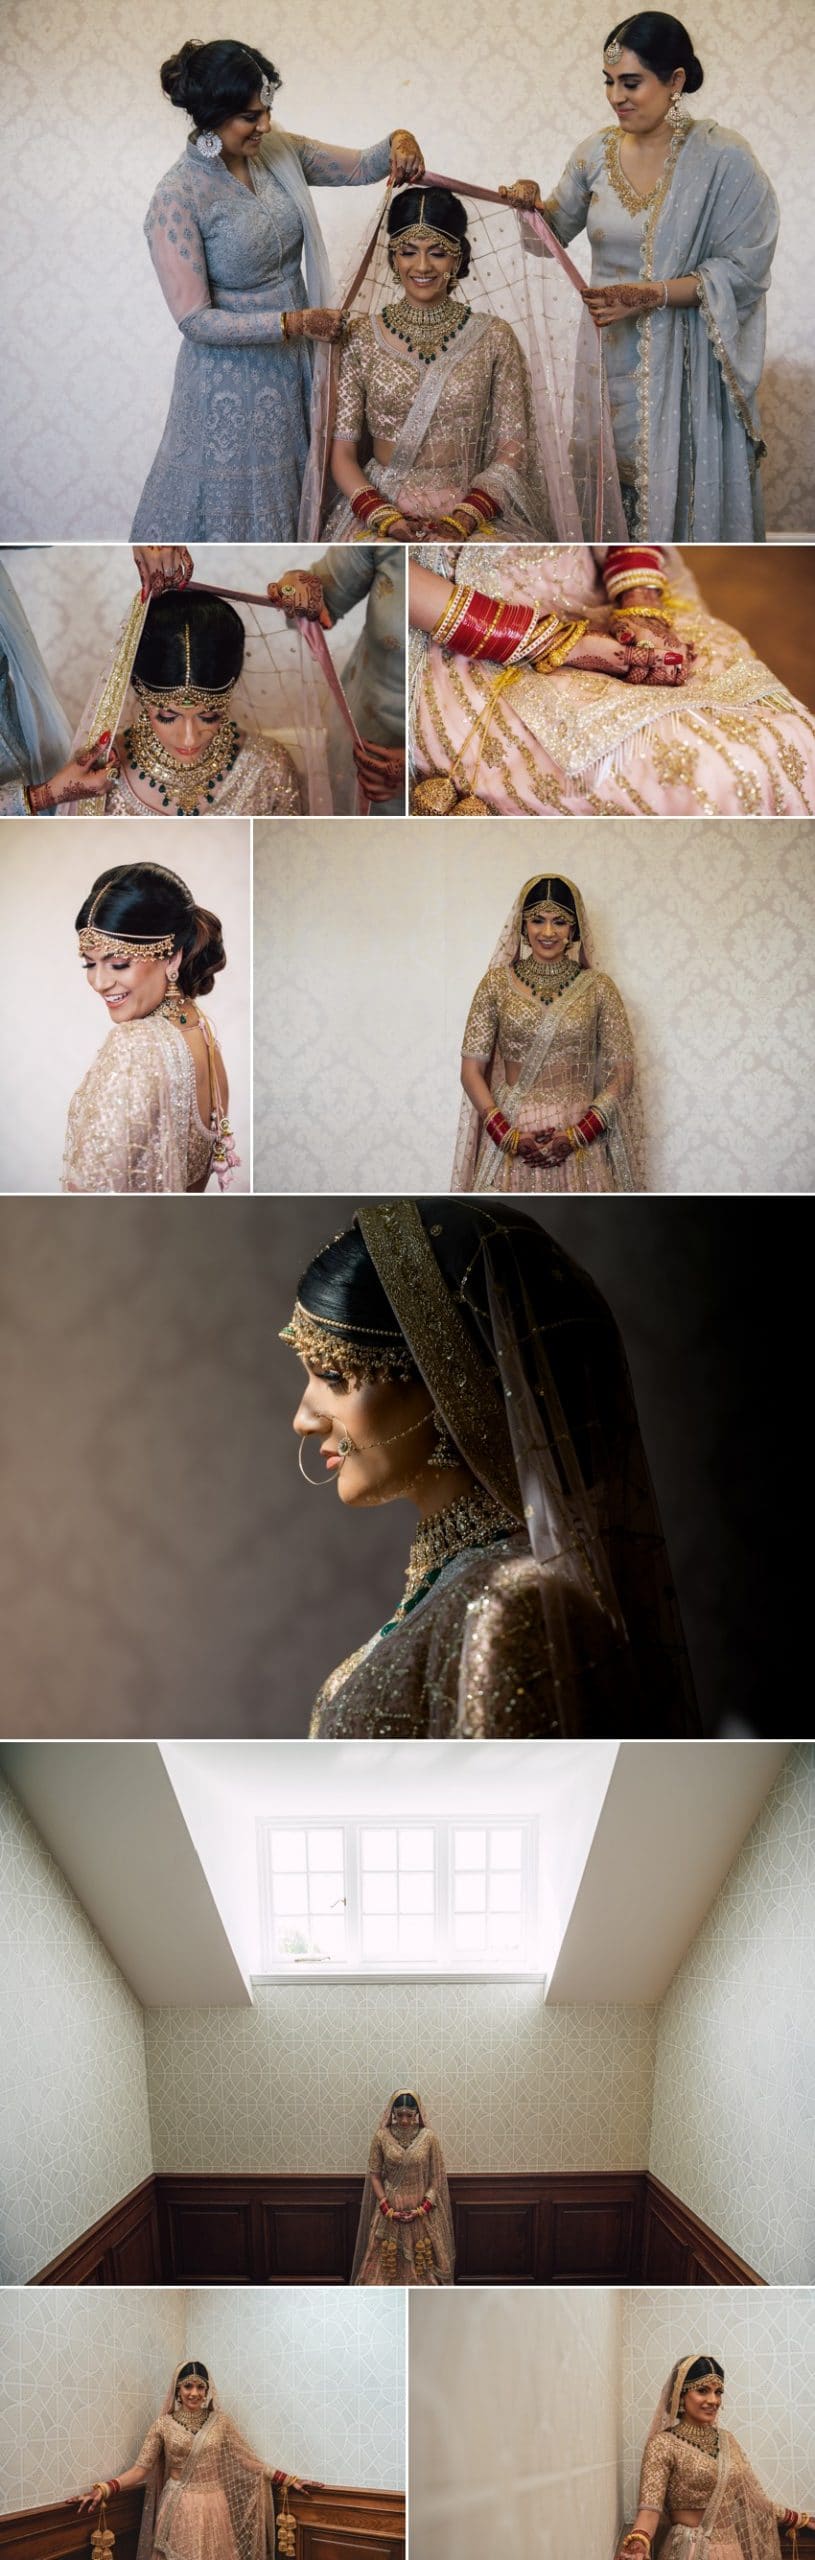 Sikh Wedding Photography at Dunchurch Park Hotel 2 scaled